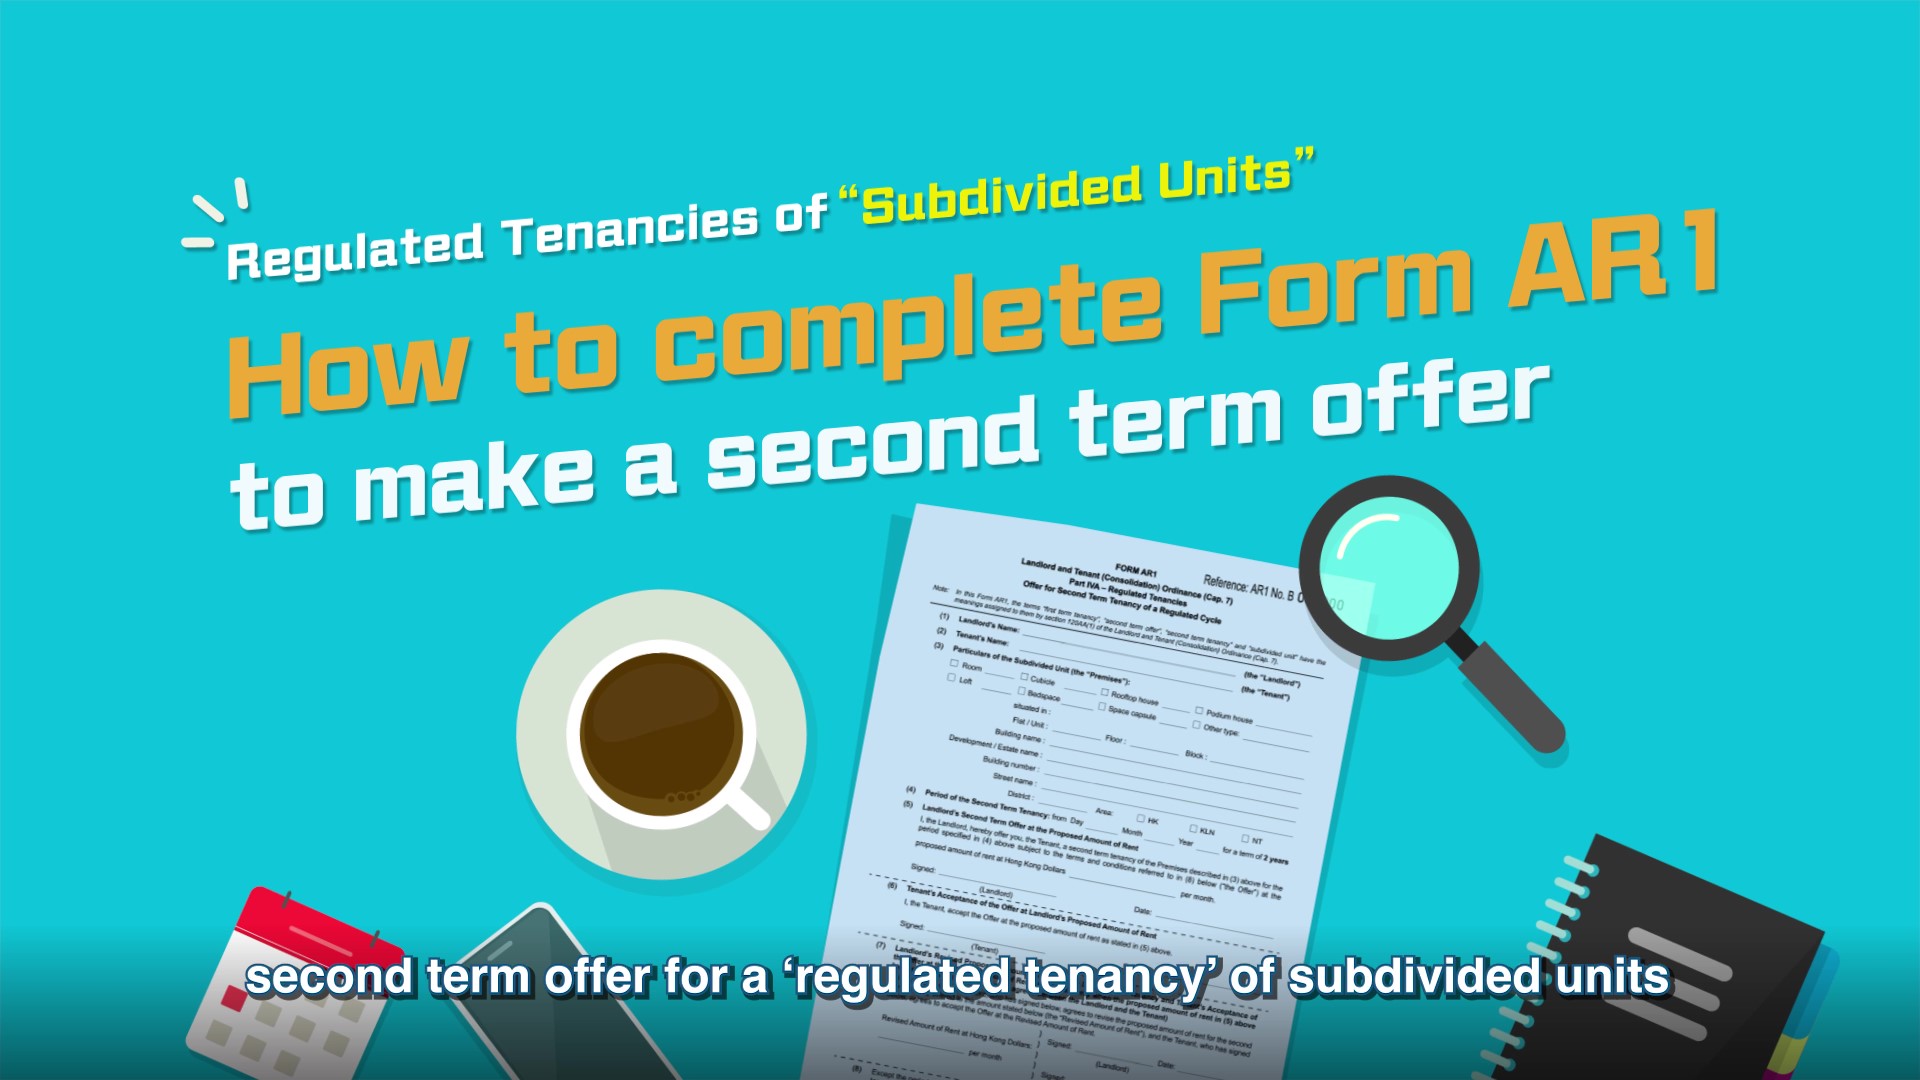 Tutorial video – Regulated Tenancies of Subdivided Units How to Complete Form AR1 to Make a Second Term Offer